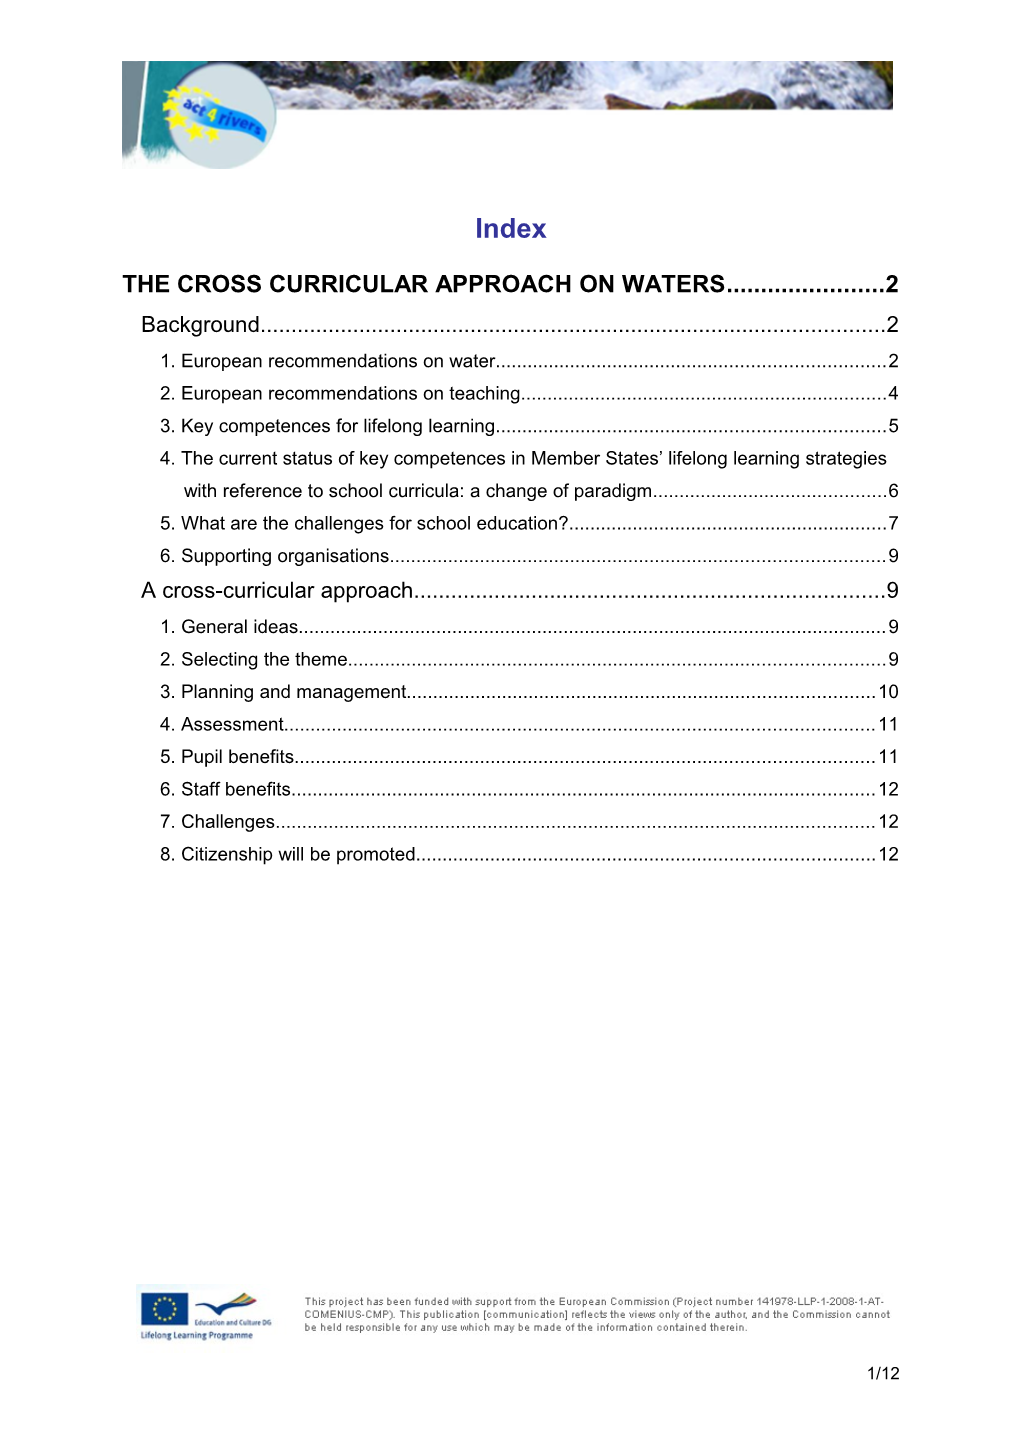 The Cross Curricular Approach on Waters